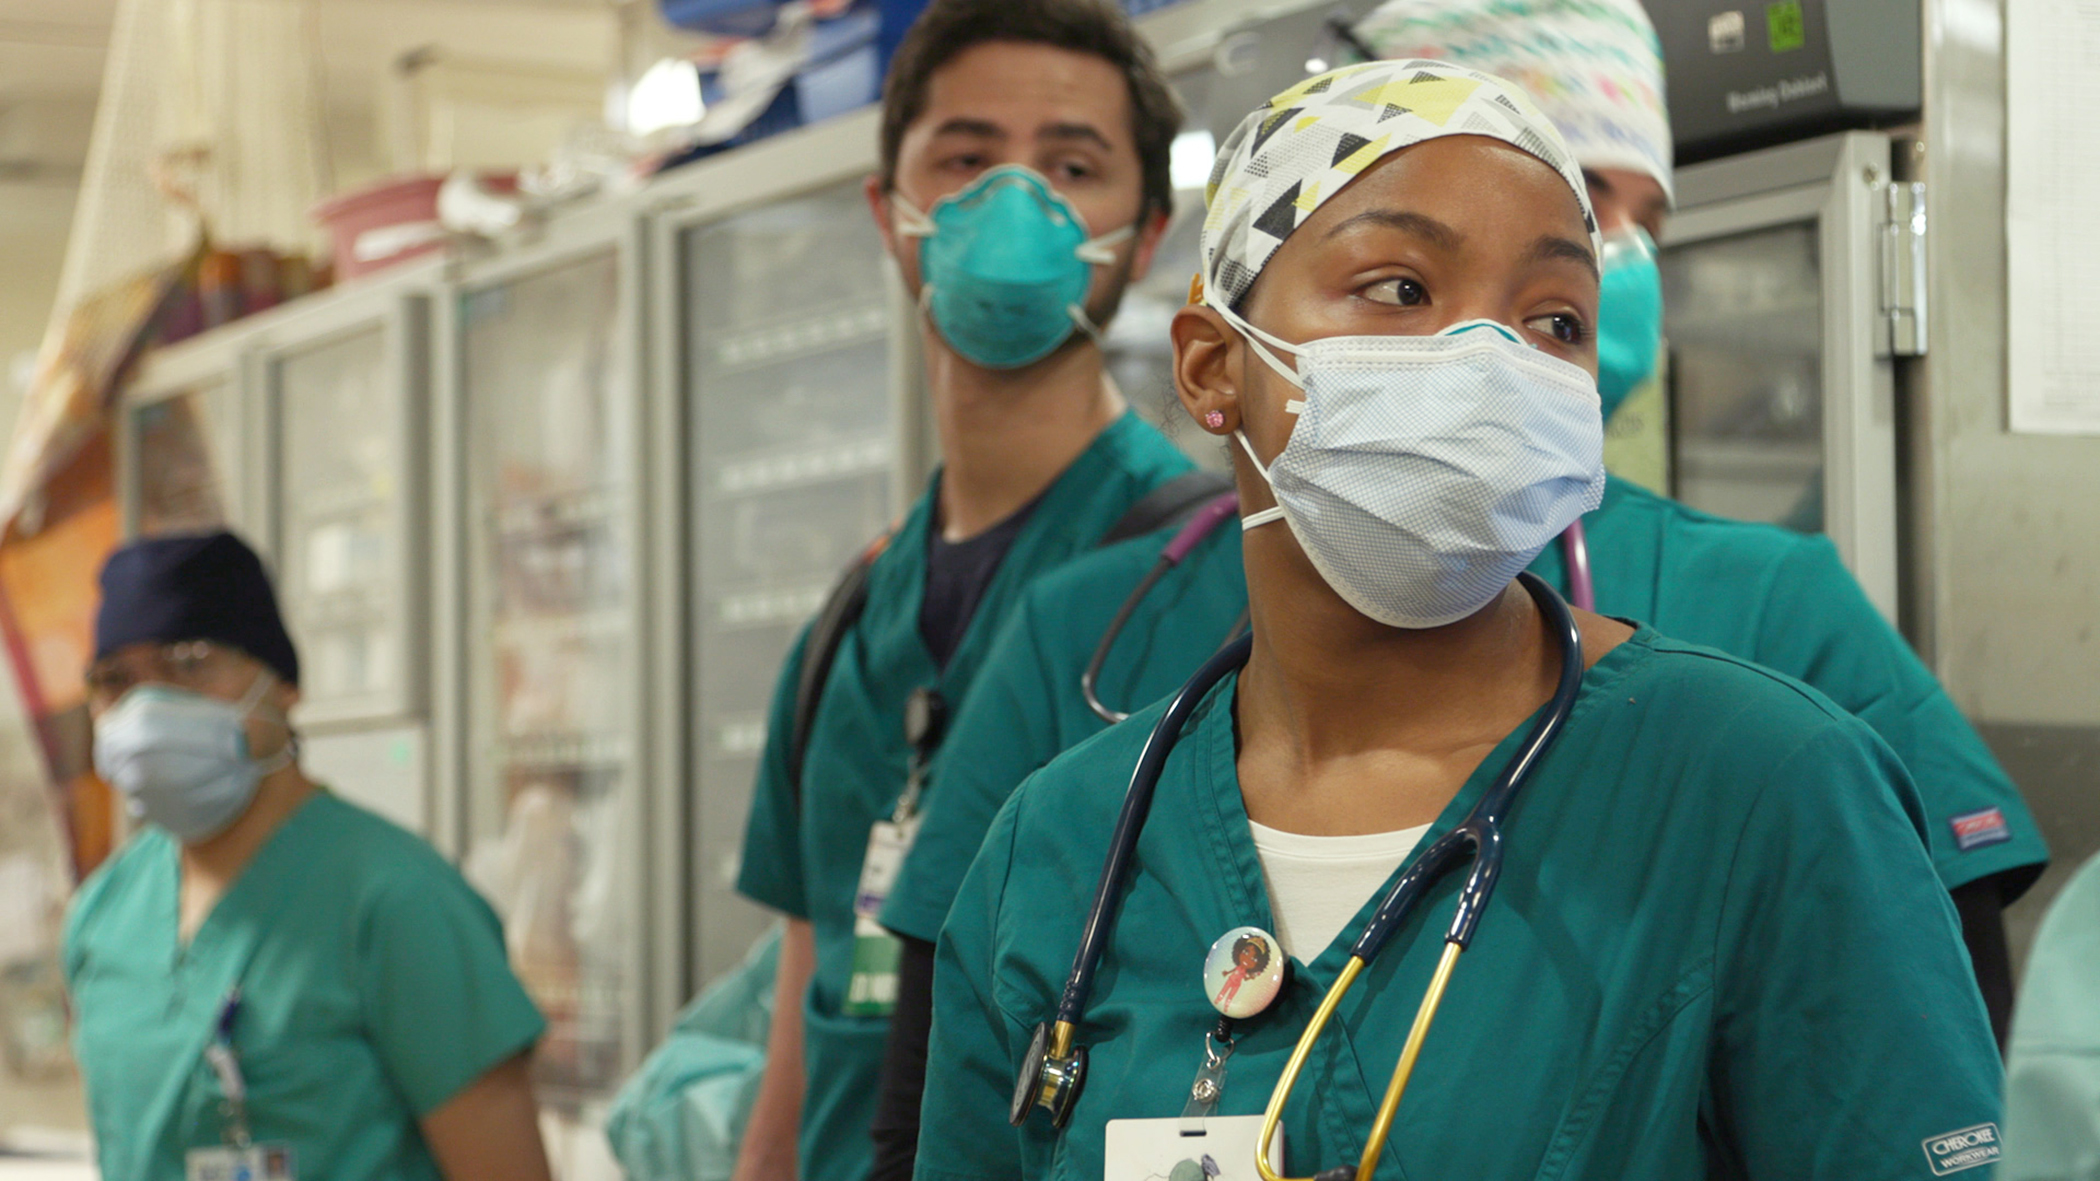 Film still from “In Case of Emergency,” about ER nurses.